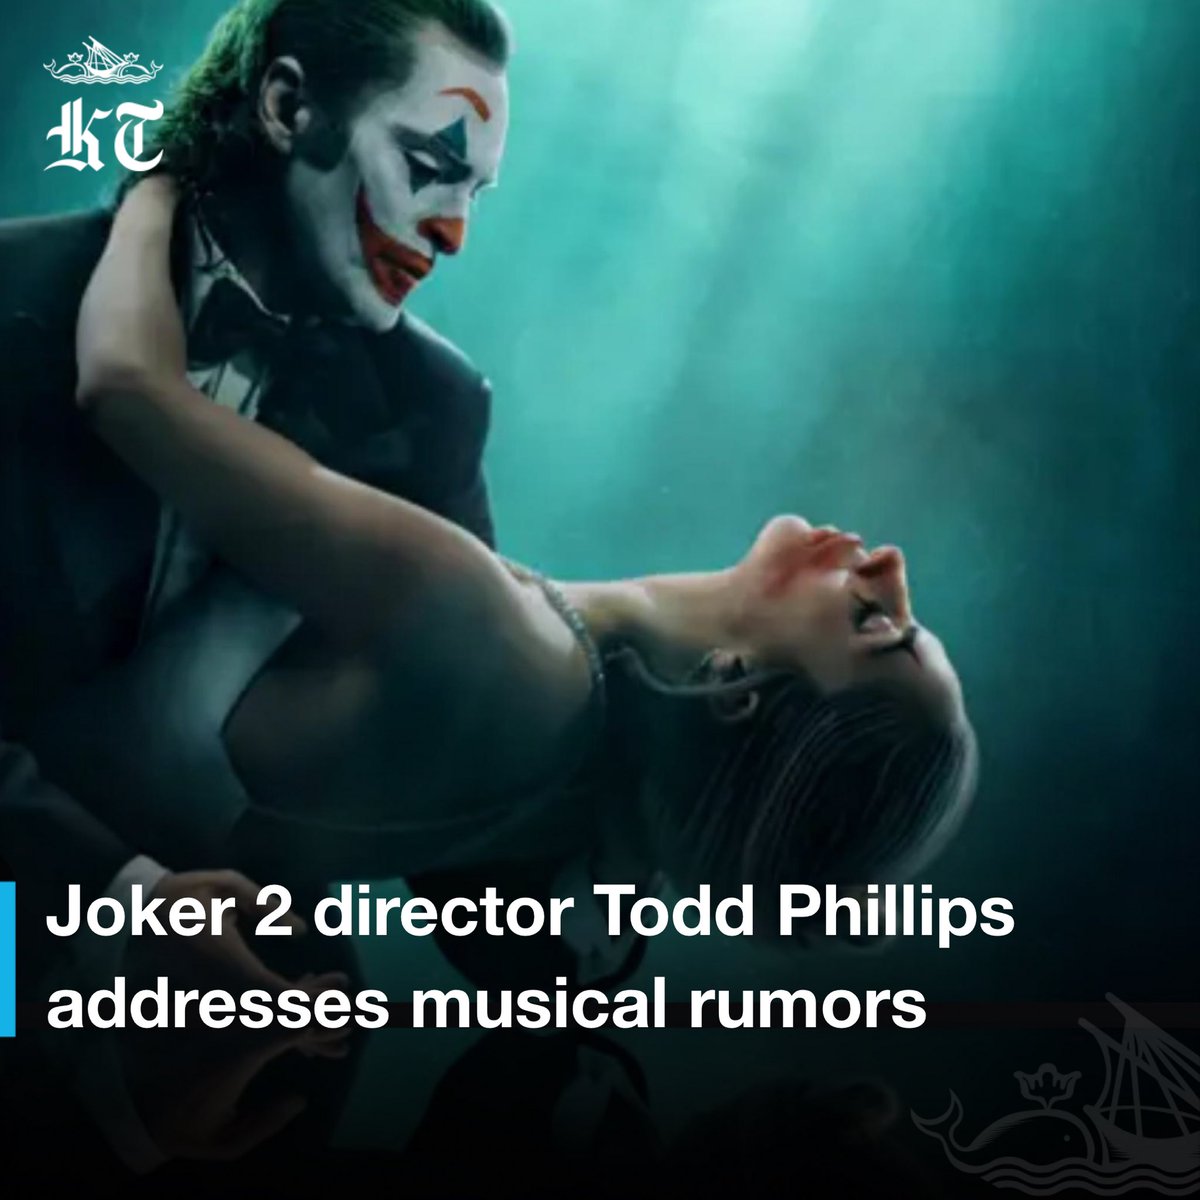 Lady Gaga is seen bringing the music, dance and a very bad romance to the Joker film sequel in its first trailer. The singer and actress plays a new version of Harley Quinn in Joker: Folie à Deux opposite Joaquin Phoenix, who won an Oscar for the original movie. The pair…